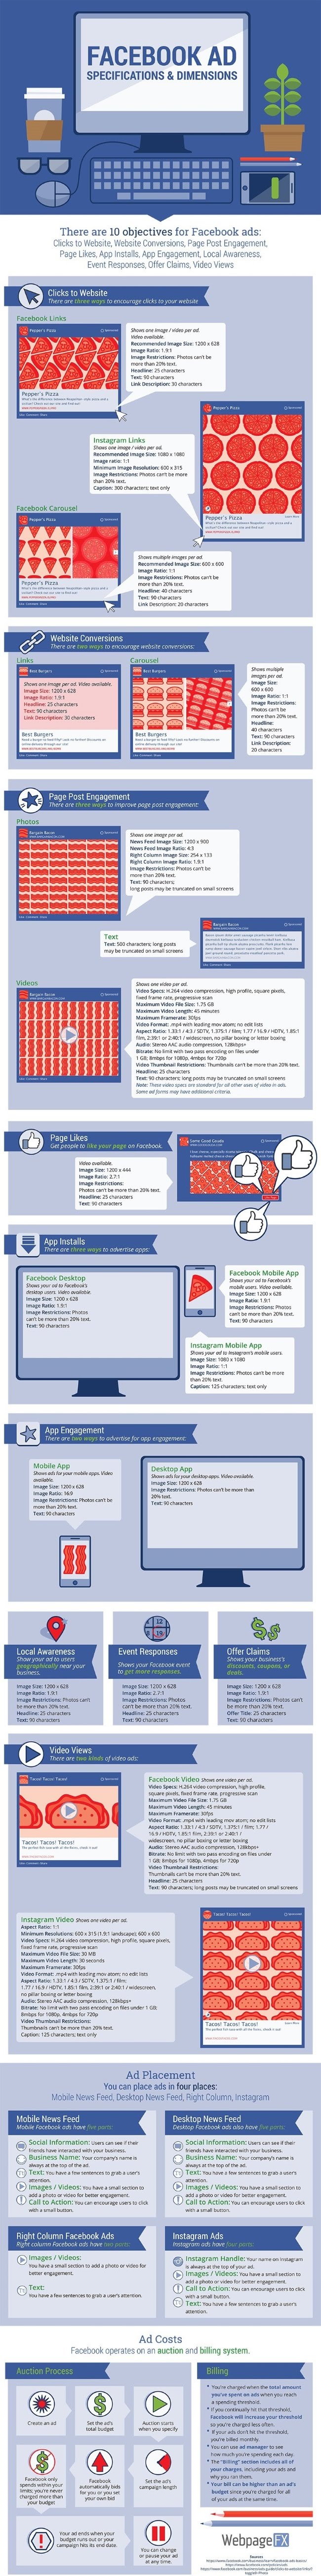 The Beginner's Guide to Advertising on Facebook - #Infographic